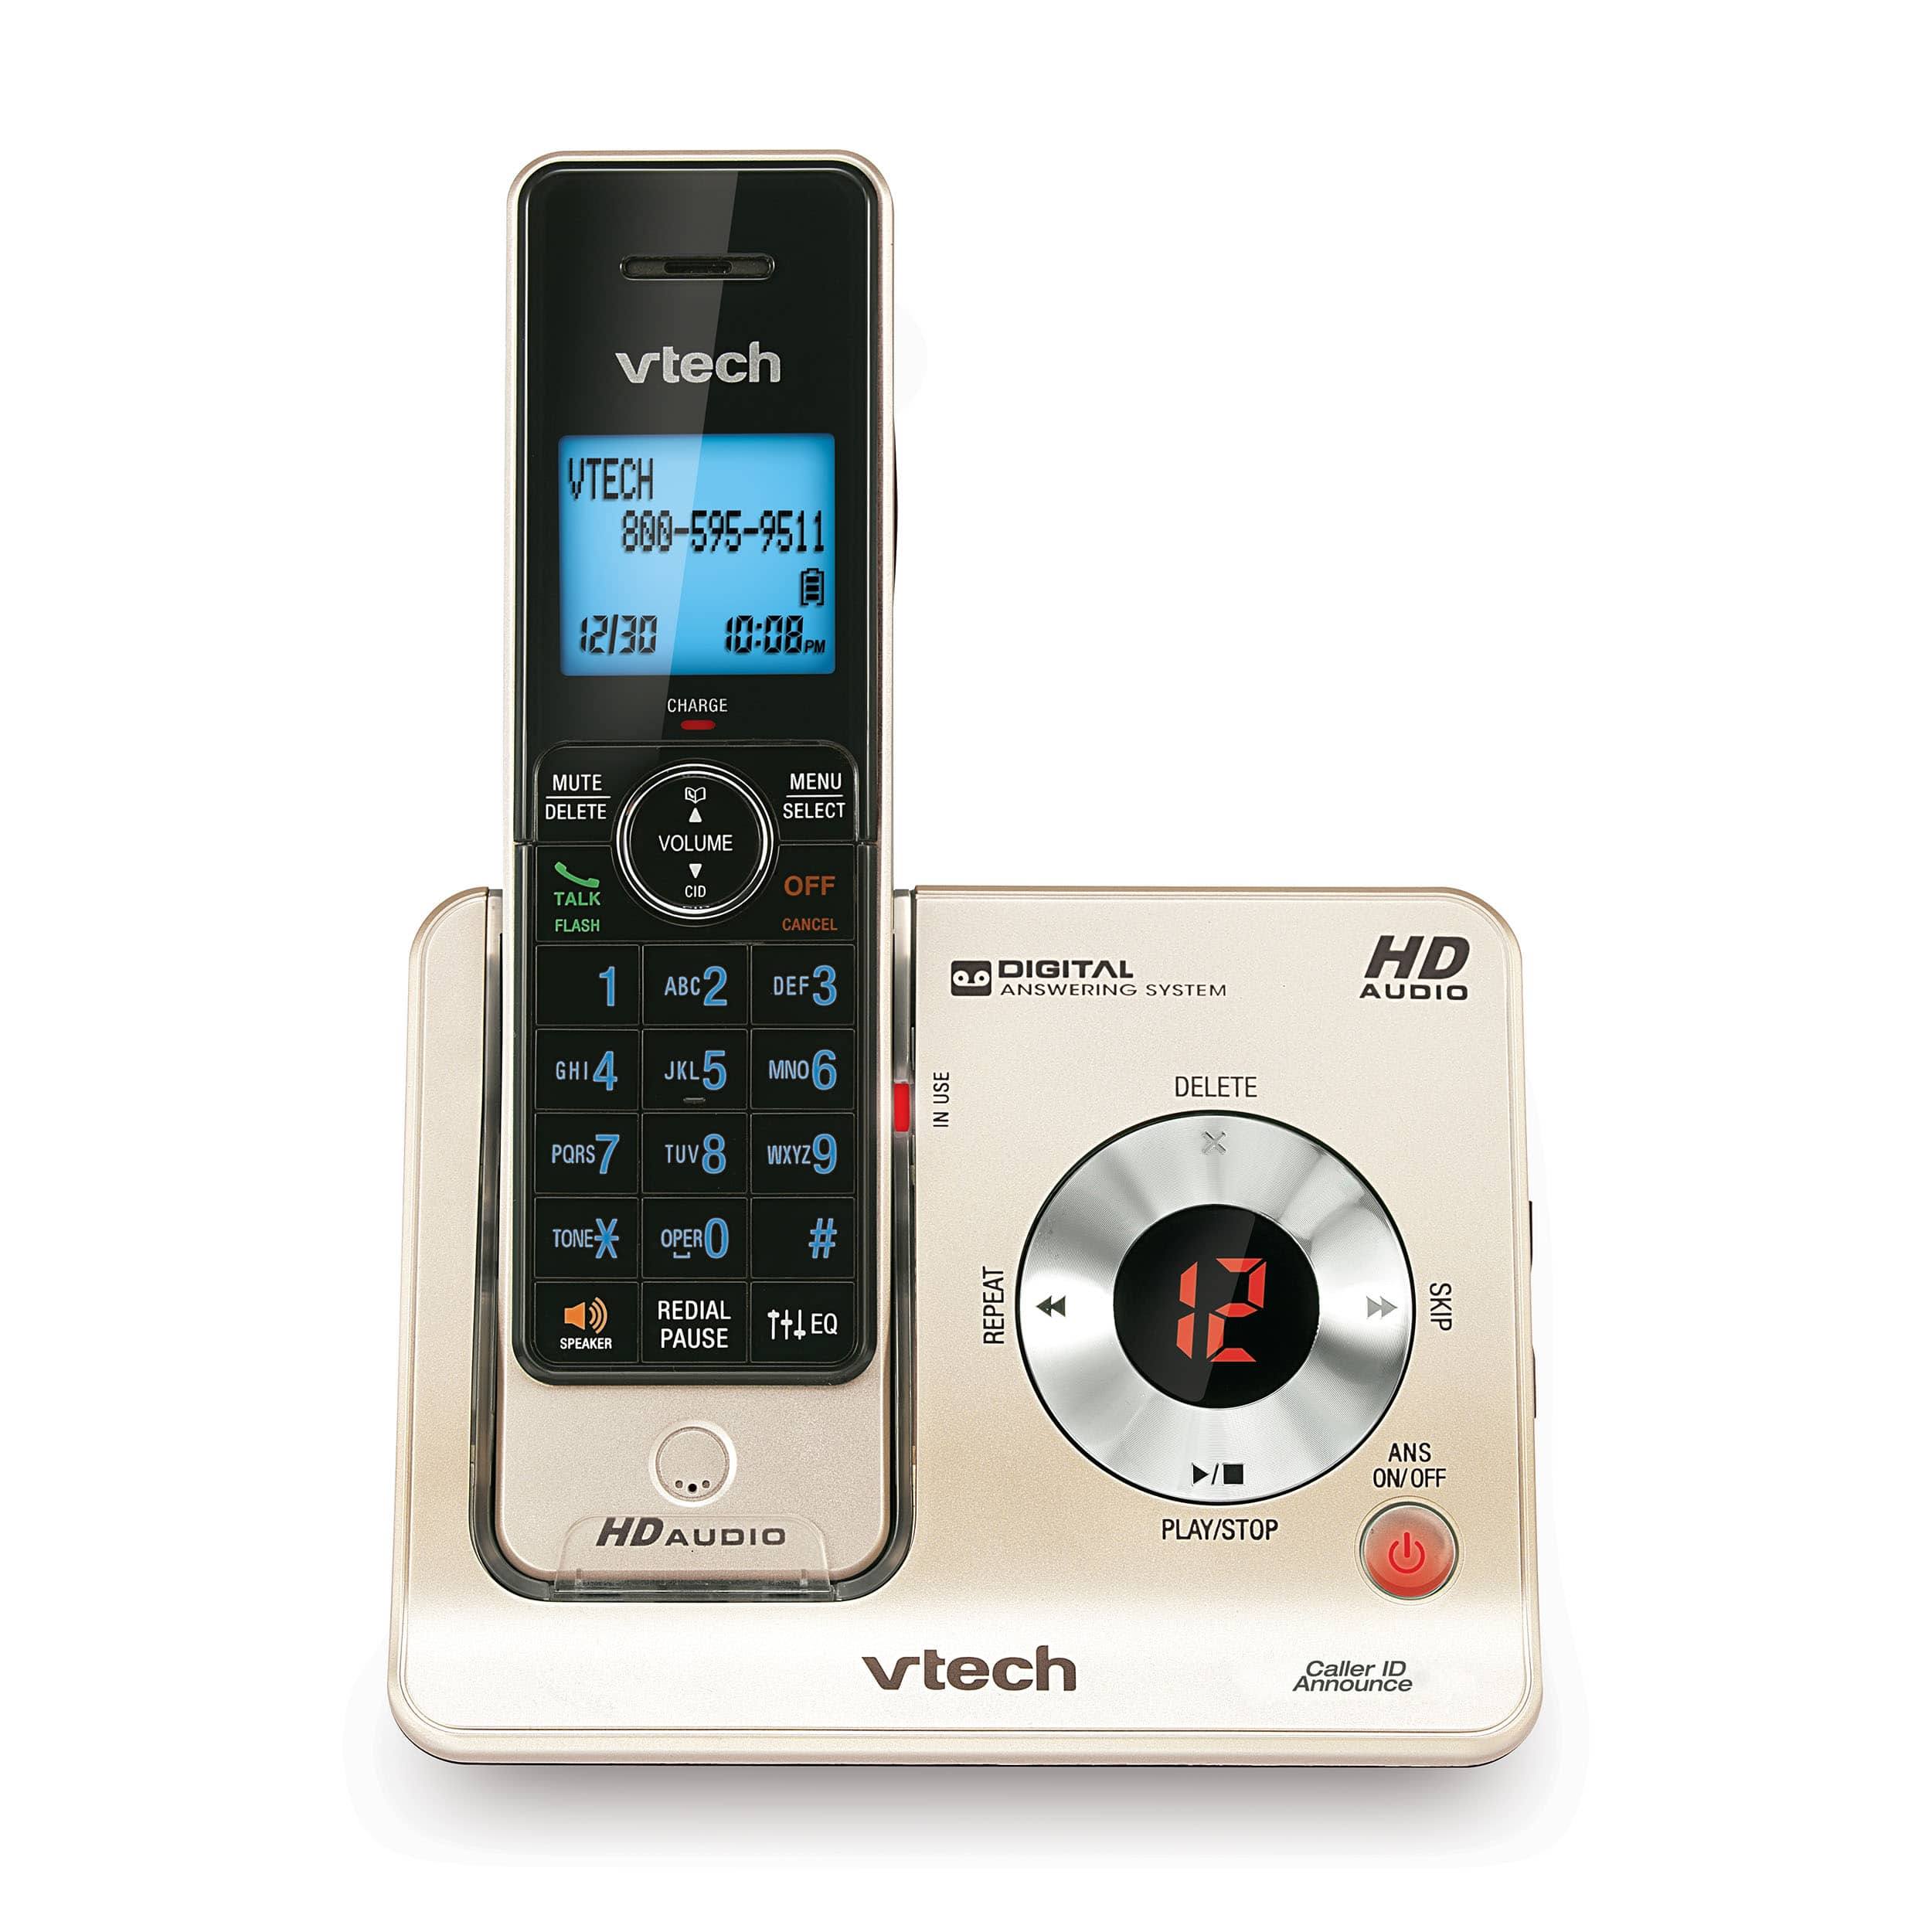 Cordless Answering System with Caller ID/Call Waiting - view 1